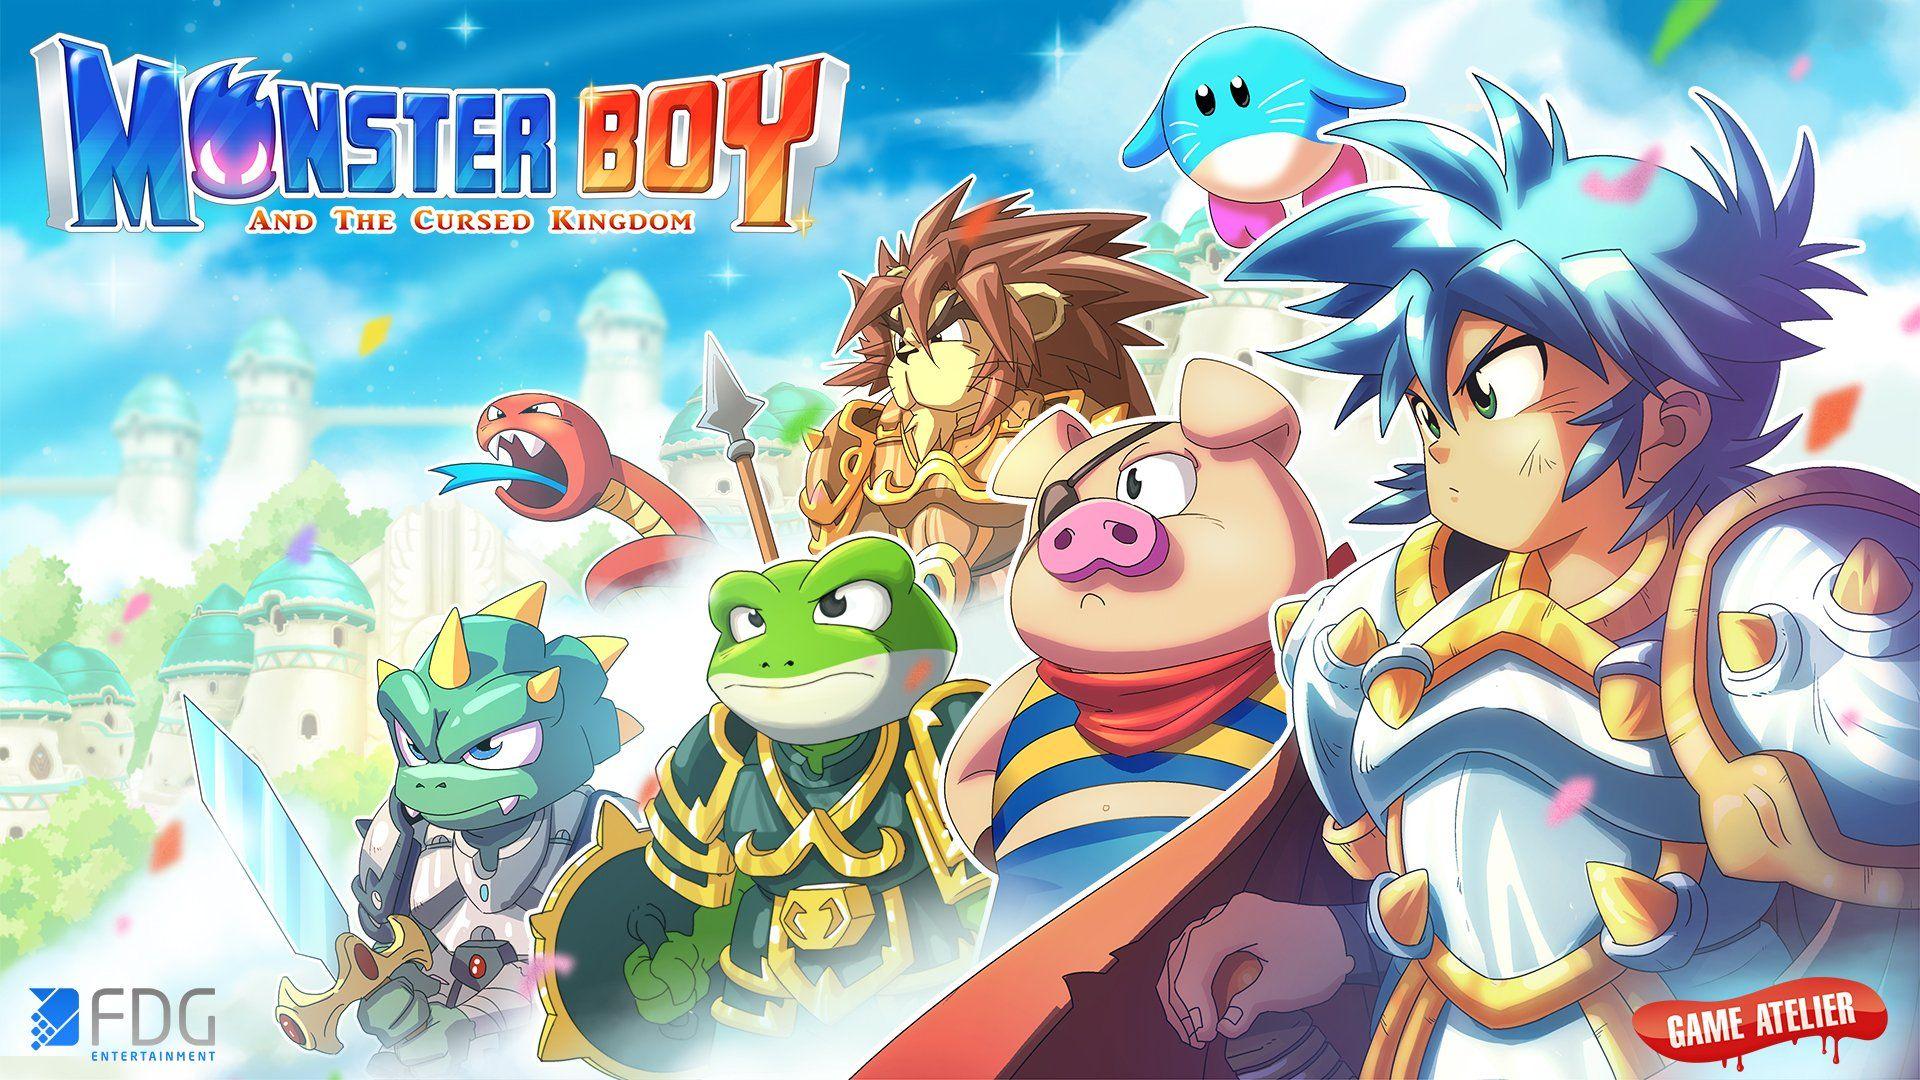 Monster Boy and the Cursed Kingdom is getting a physical release